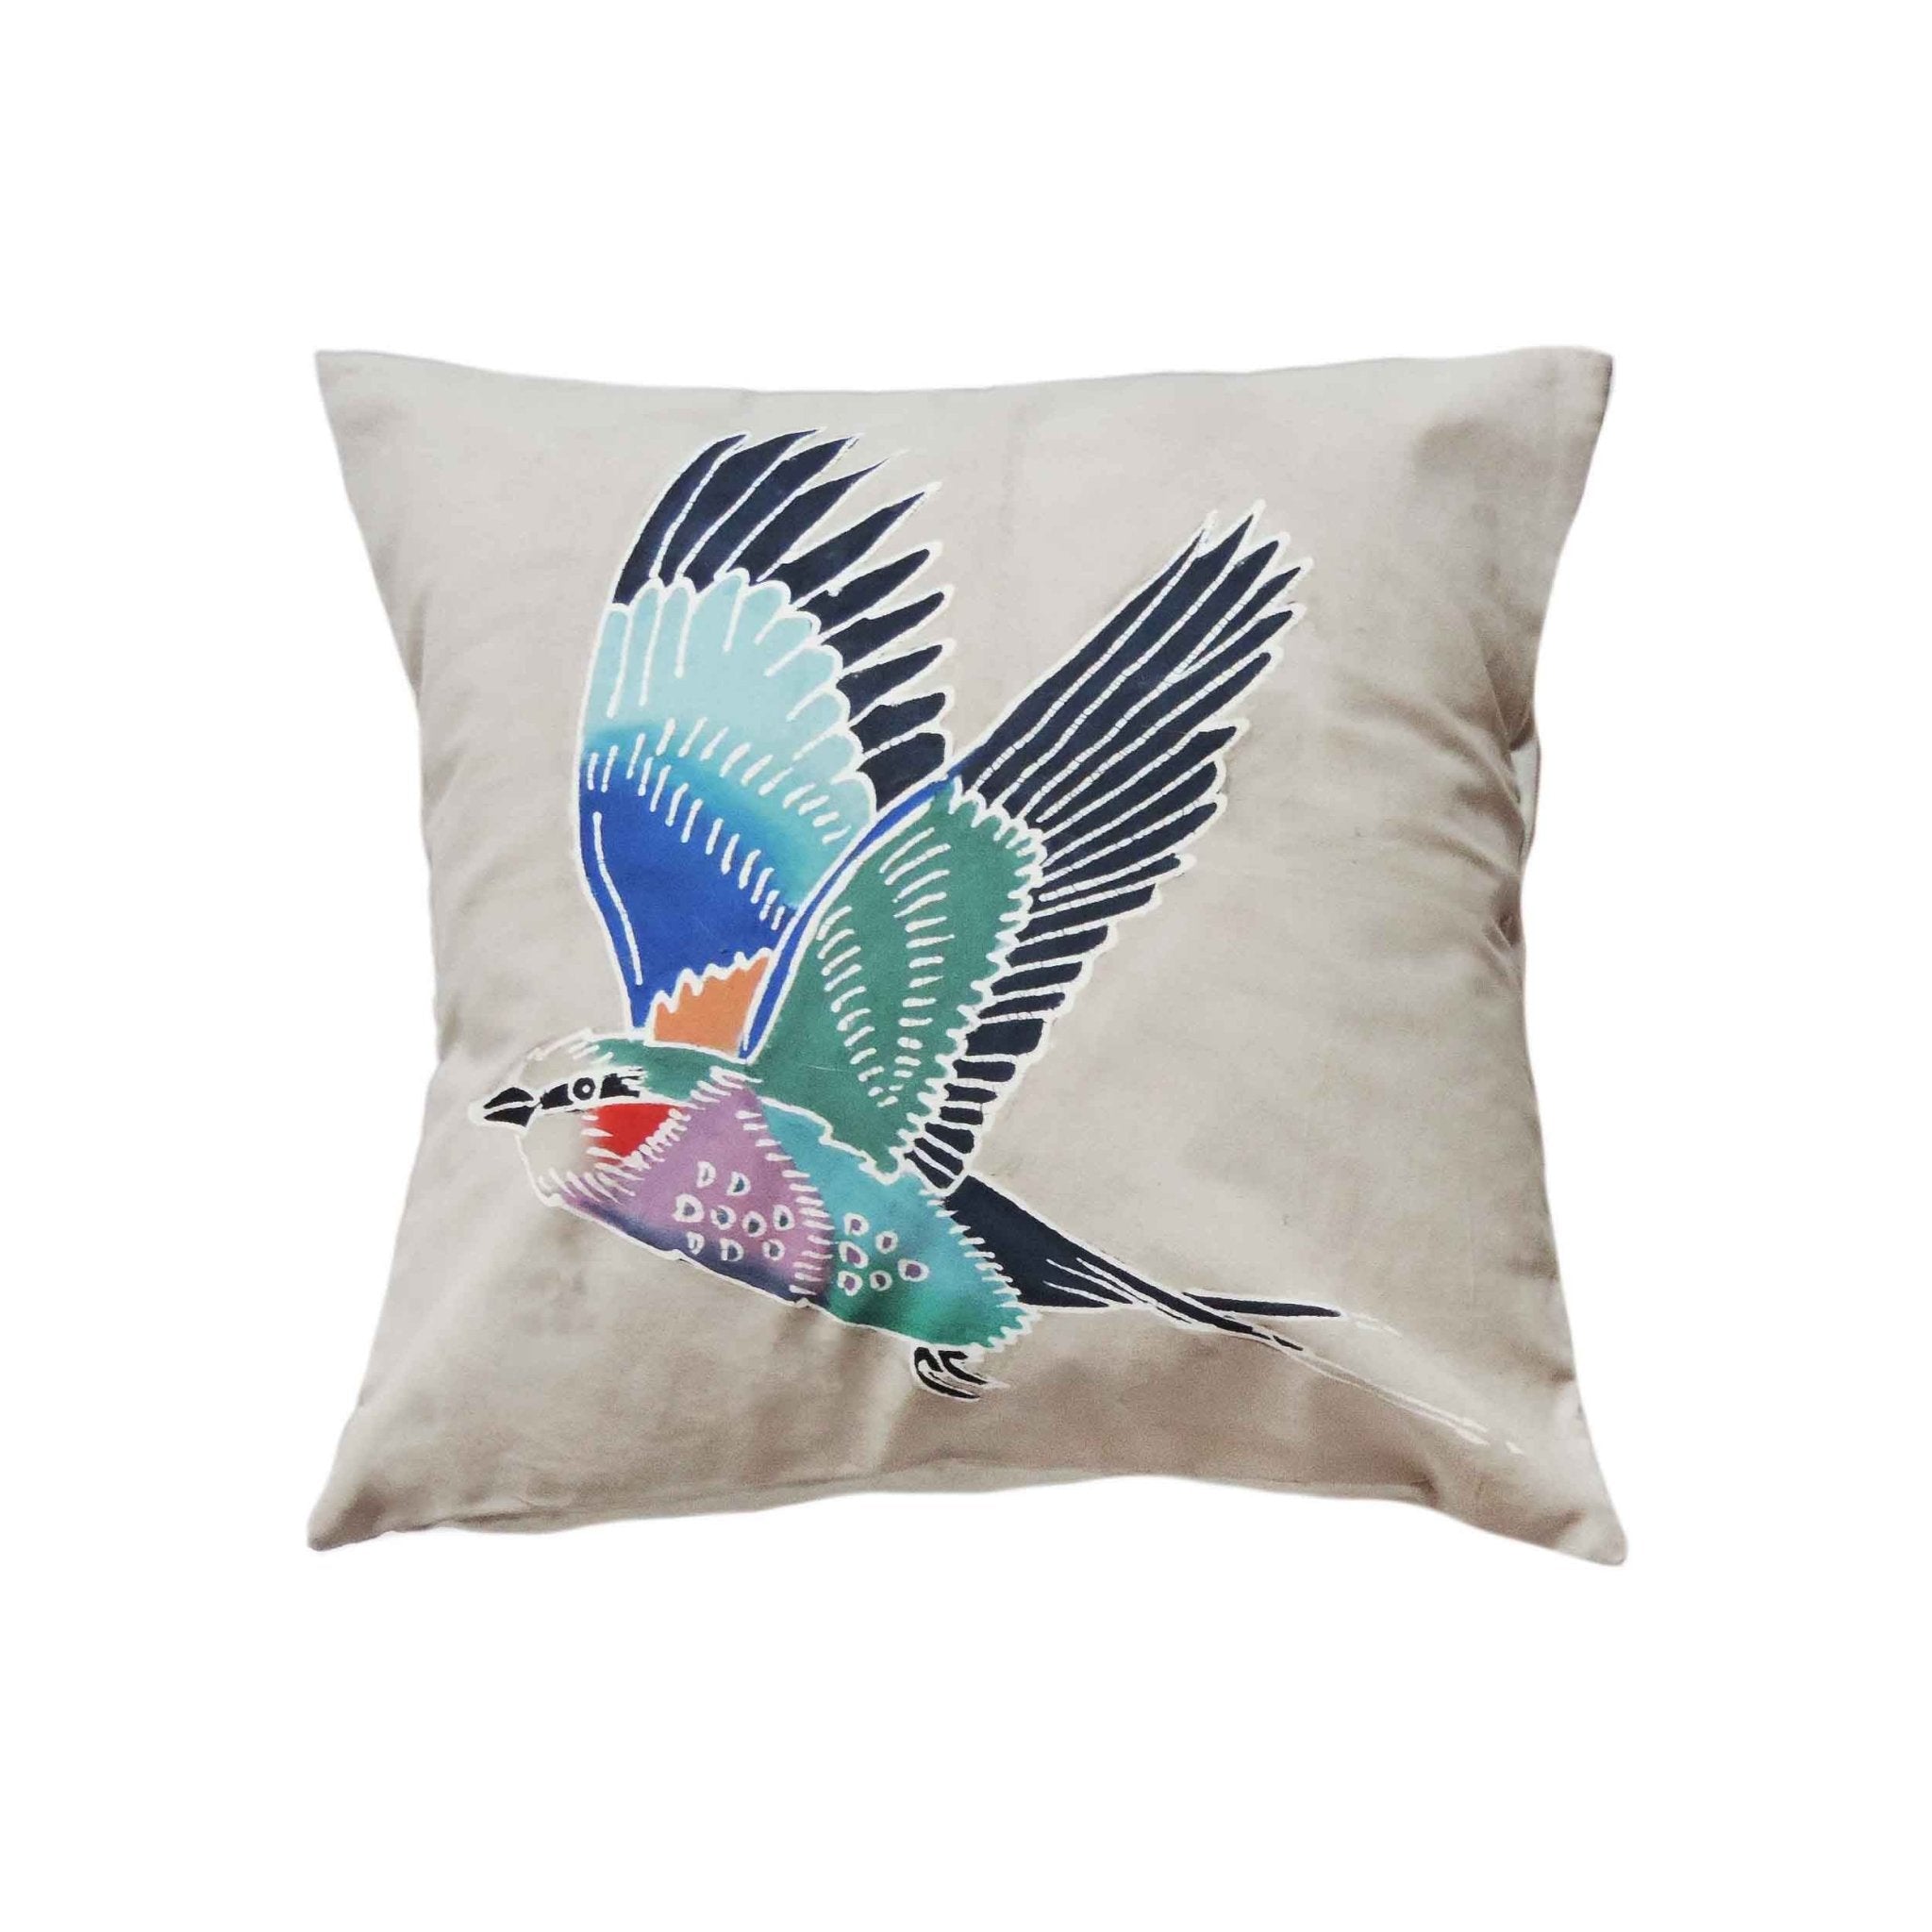 The perfect light beige cushion cover adorned with a beautiful African bird, the lilac breasted roller.